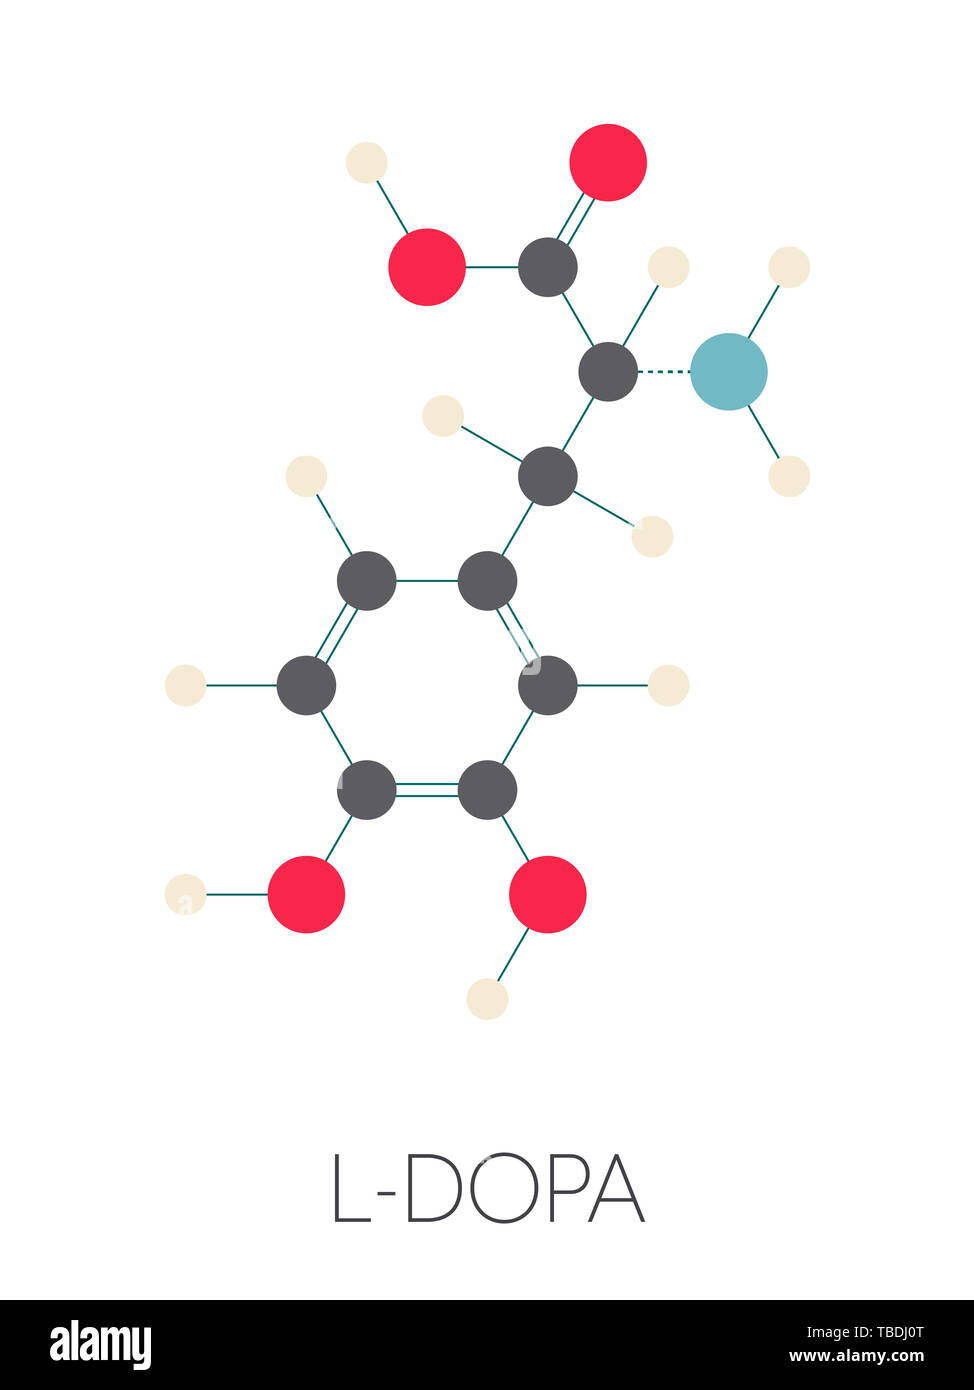 L-DOPA (levodopa) Parkinson's disease drug molecule. Stylized skeletal formula (chemical structure). Atoms are shown as color-coded circles connected by thin bonds, on a white background: hydrogen (beige), carbon (grey), oxygen (red), nitrogen (blue). Stock Photo